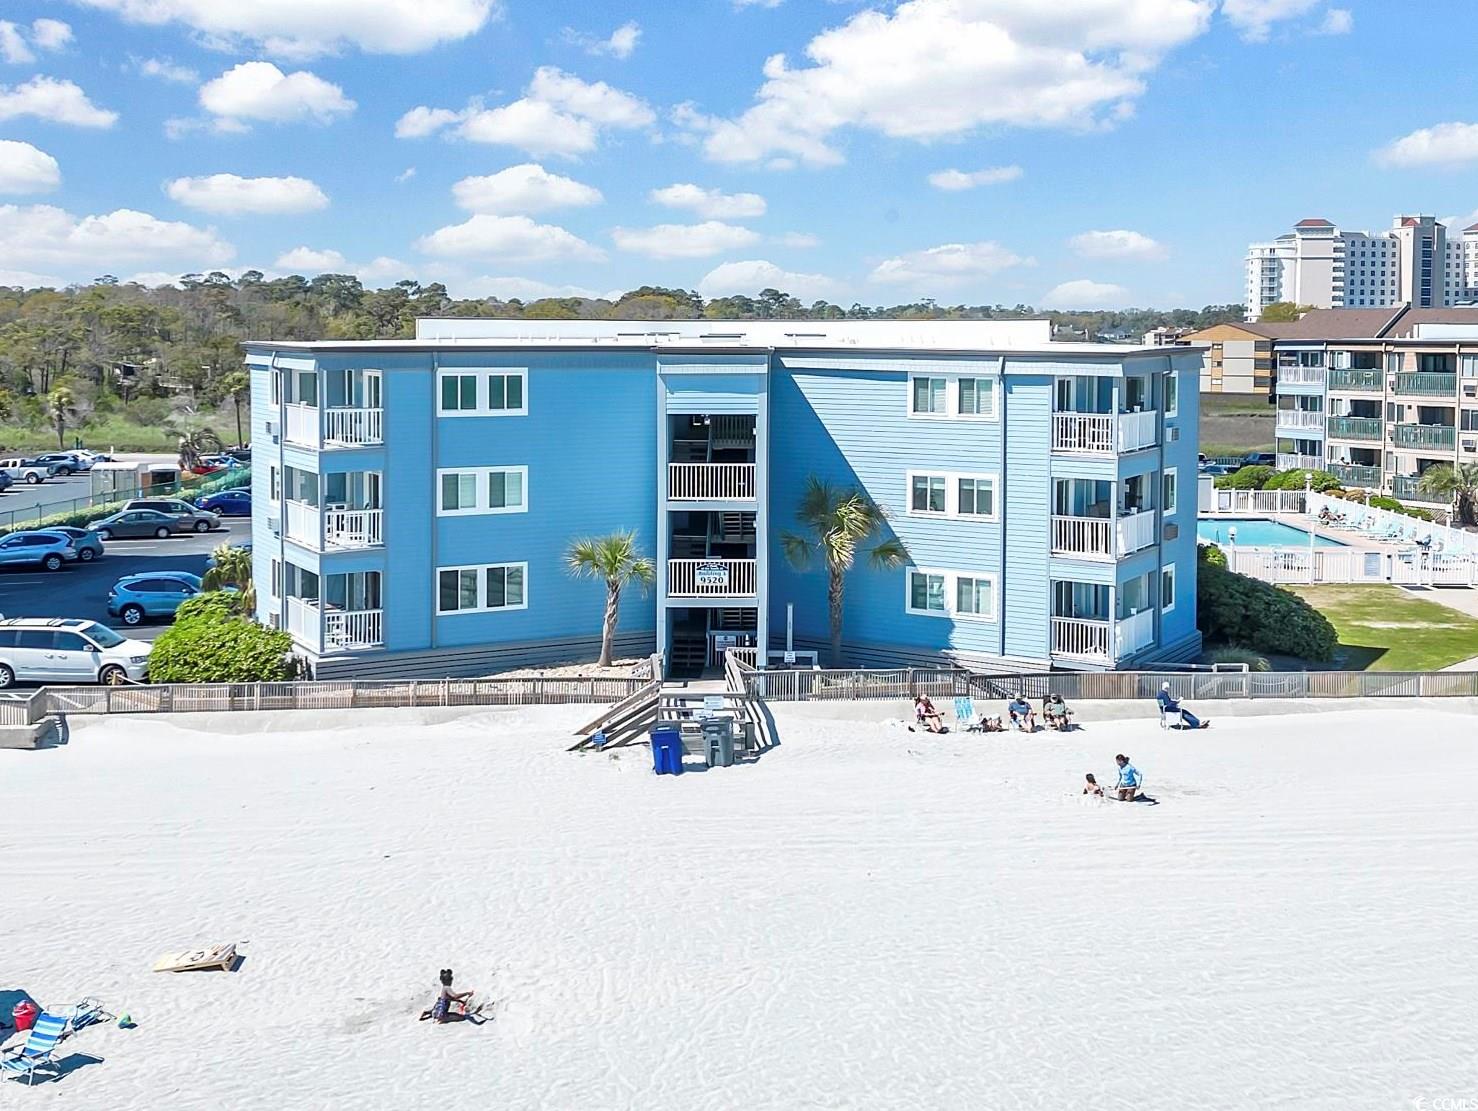 rare oceanfront unit!! these direct oceanfront units rarely come on the market in a place at the beach iii. enjoy incredible views from your living room, kitchen, master bedroom and balcony. you never have to leave your condo to feel as if you are sitting right on the beach! this gorgeous unit comes with so many updates and has not been rented since 2019. starting in the kitchen where you'll find beautiful granite countertops, backsplash and updated cabinets with under-the-cabinet lighting. the bar creates additional seating for guests at mealtime. throughout the unit, you'll find a fresh new coat of coastal gray paint and new flooring in every room--lvp in kitchen and baths, carpet everywhere else. in the living room, you'll notice the interior of the beachfront wall has been updated with sheetrock instead of paneling. new living room furniture and decor create a warm, comfortable and coastal feel. the guestroom is spacious with two twin beds and a large closet, and is conveniently located just outside the guest bath where you'll find an updated vanity and toilet. the master bedroom features a new king sized headboard and dresser, a private door leading to the balcony and offers gorgeous views of the beautiful blue atlantic ocean. the master bath has a new vanity, toilet and walk-in shower. two closets allow for ample storage. the balcony is the perfect place for a morning cup of coffee or and evening glass of wine with views that are absolutely breathtaking. large storage closet by the front door for chairs, supplies, etc....this unit has recently undergone exterior updates of new windows in the living room and master, new sliders, updated balcony, new door to master from balcony and new hardy plank siding. great rental possibilities or keep it all for yourself! located in the iconic arcadian shores section of myrtle beach. just a few buildings down from the famous ocean annie's! minutes from shopping, restaurants and entertainment. call for your showing today! close in time to have your own place at the beach!